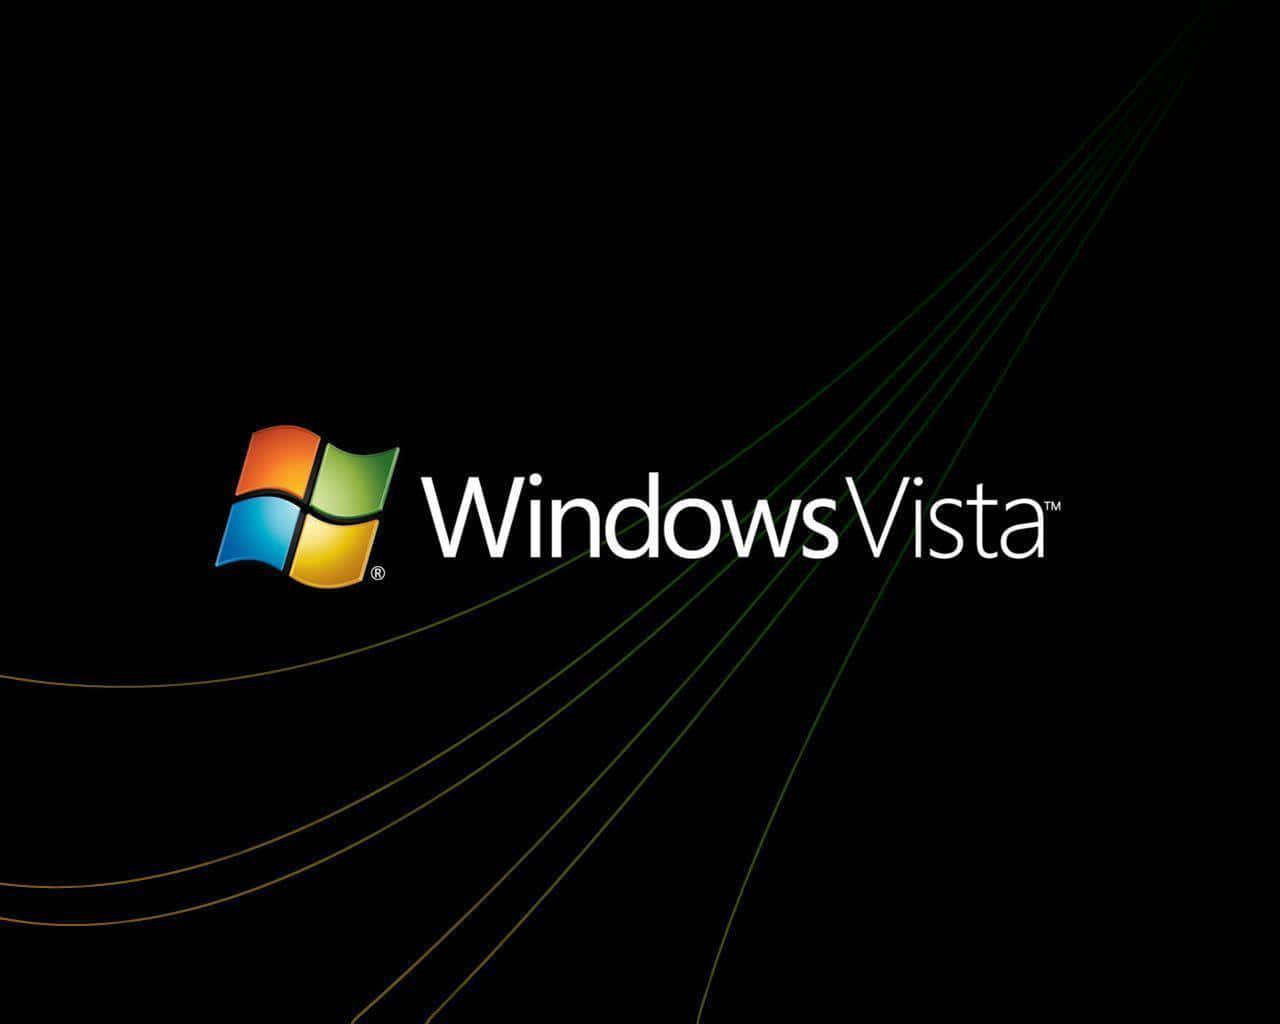 Windows Vista - Widely Used Operating System